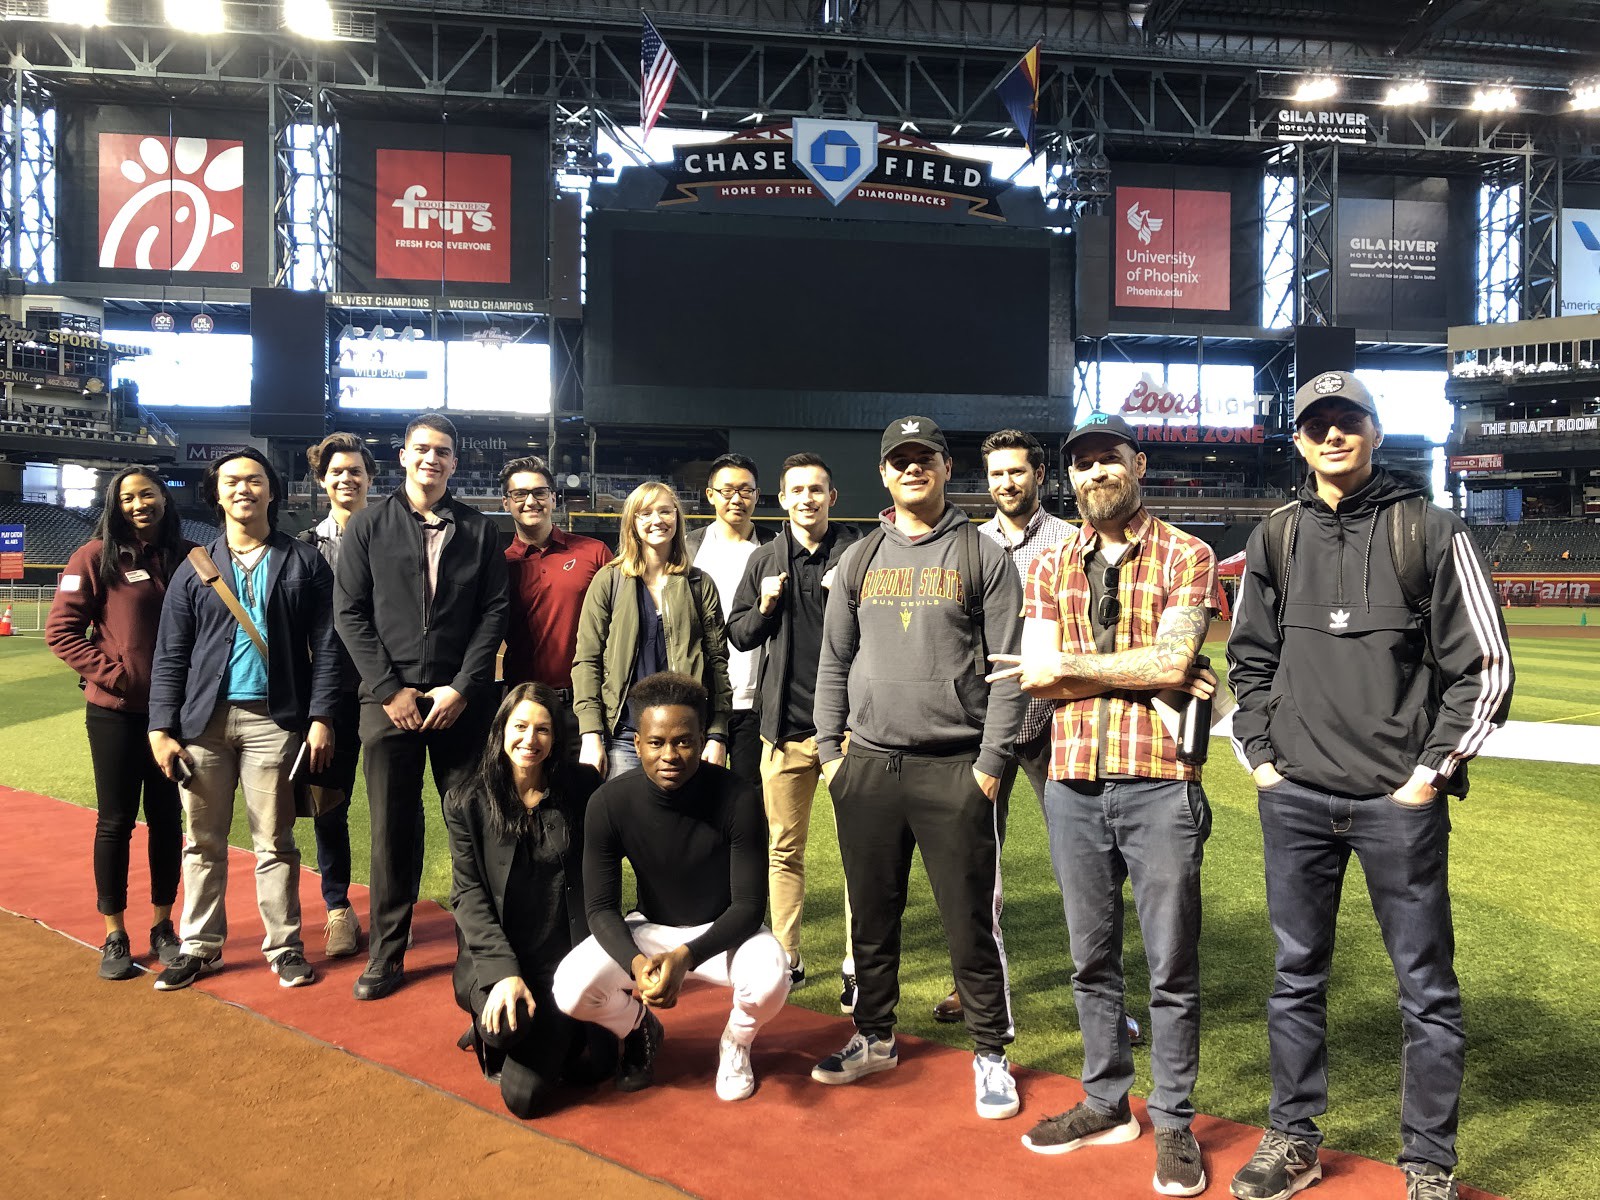 Students on the tour posing for a photo on the field at Chase Field, home of the Arizona Diamondbacks